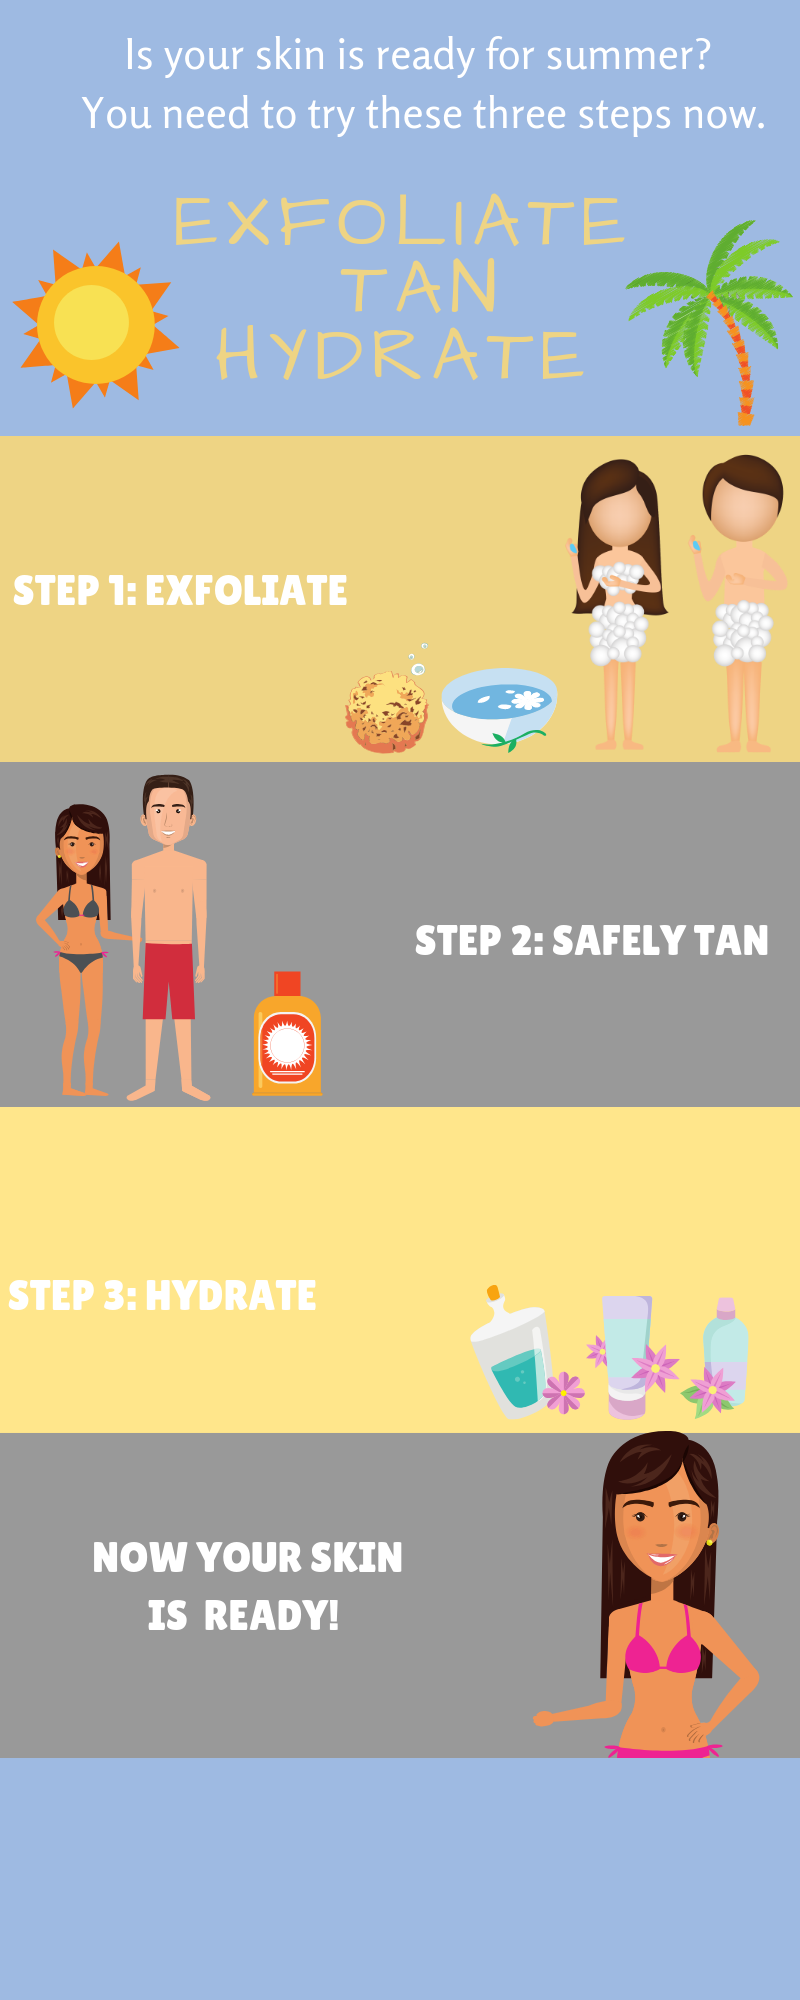 3 Summer Skin Care Tips You Need For Sexy Skin